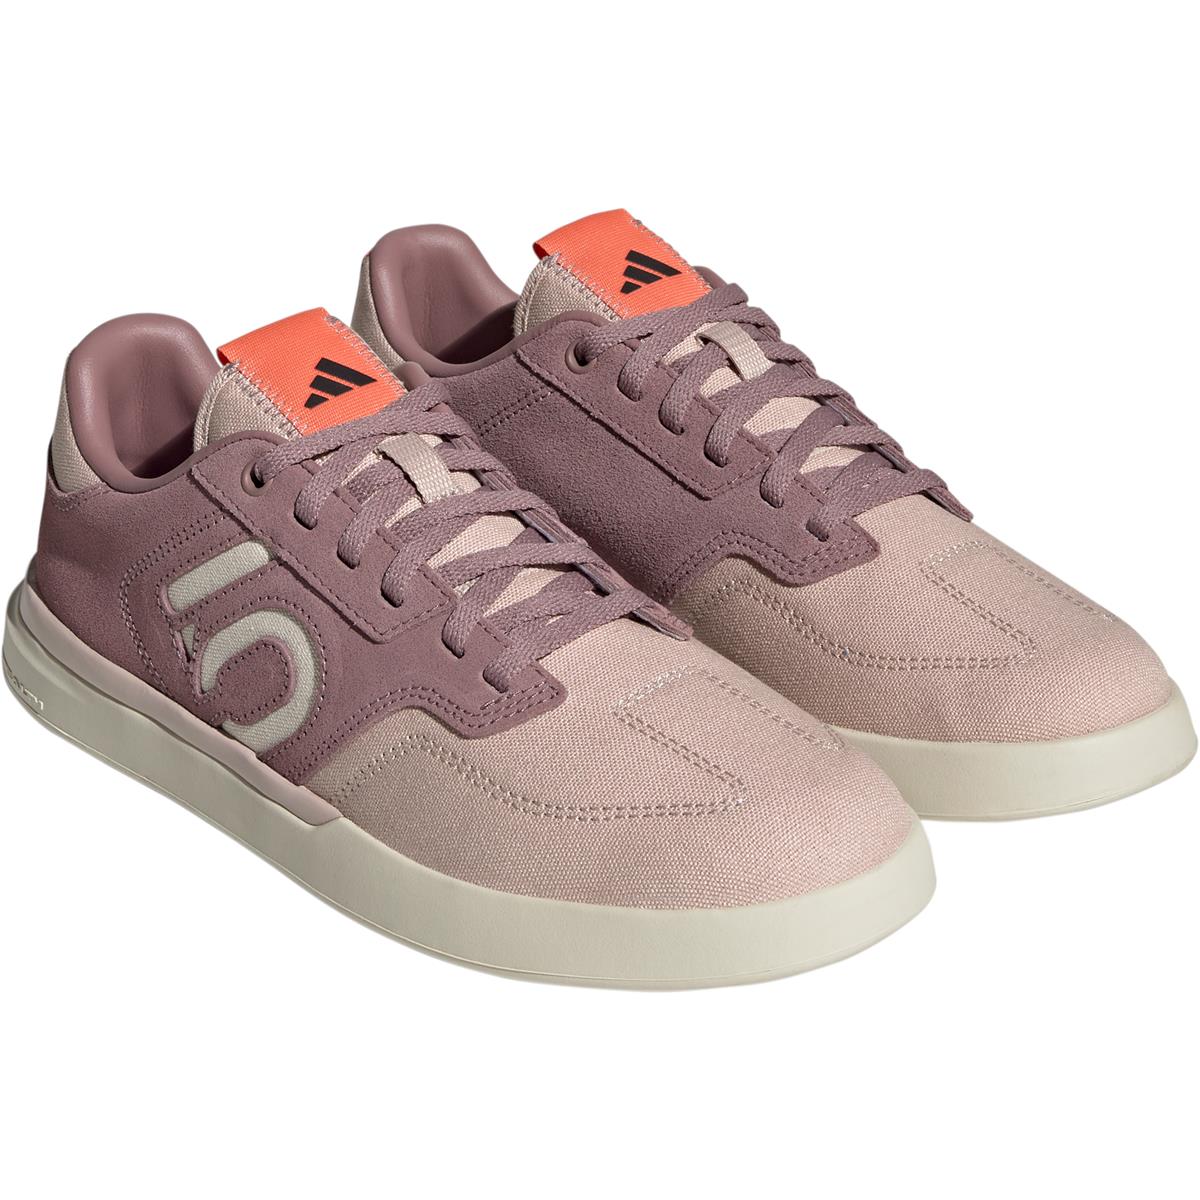 Five Ten Femme Chaussures VTT Sleuth Wonder Oxide/Wonder Taupe/Coral Fusion